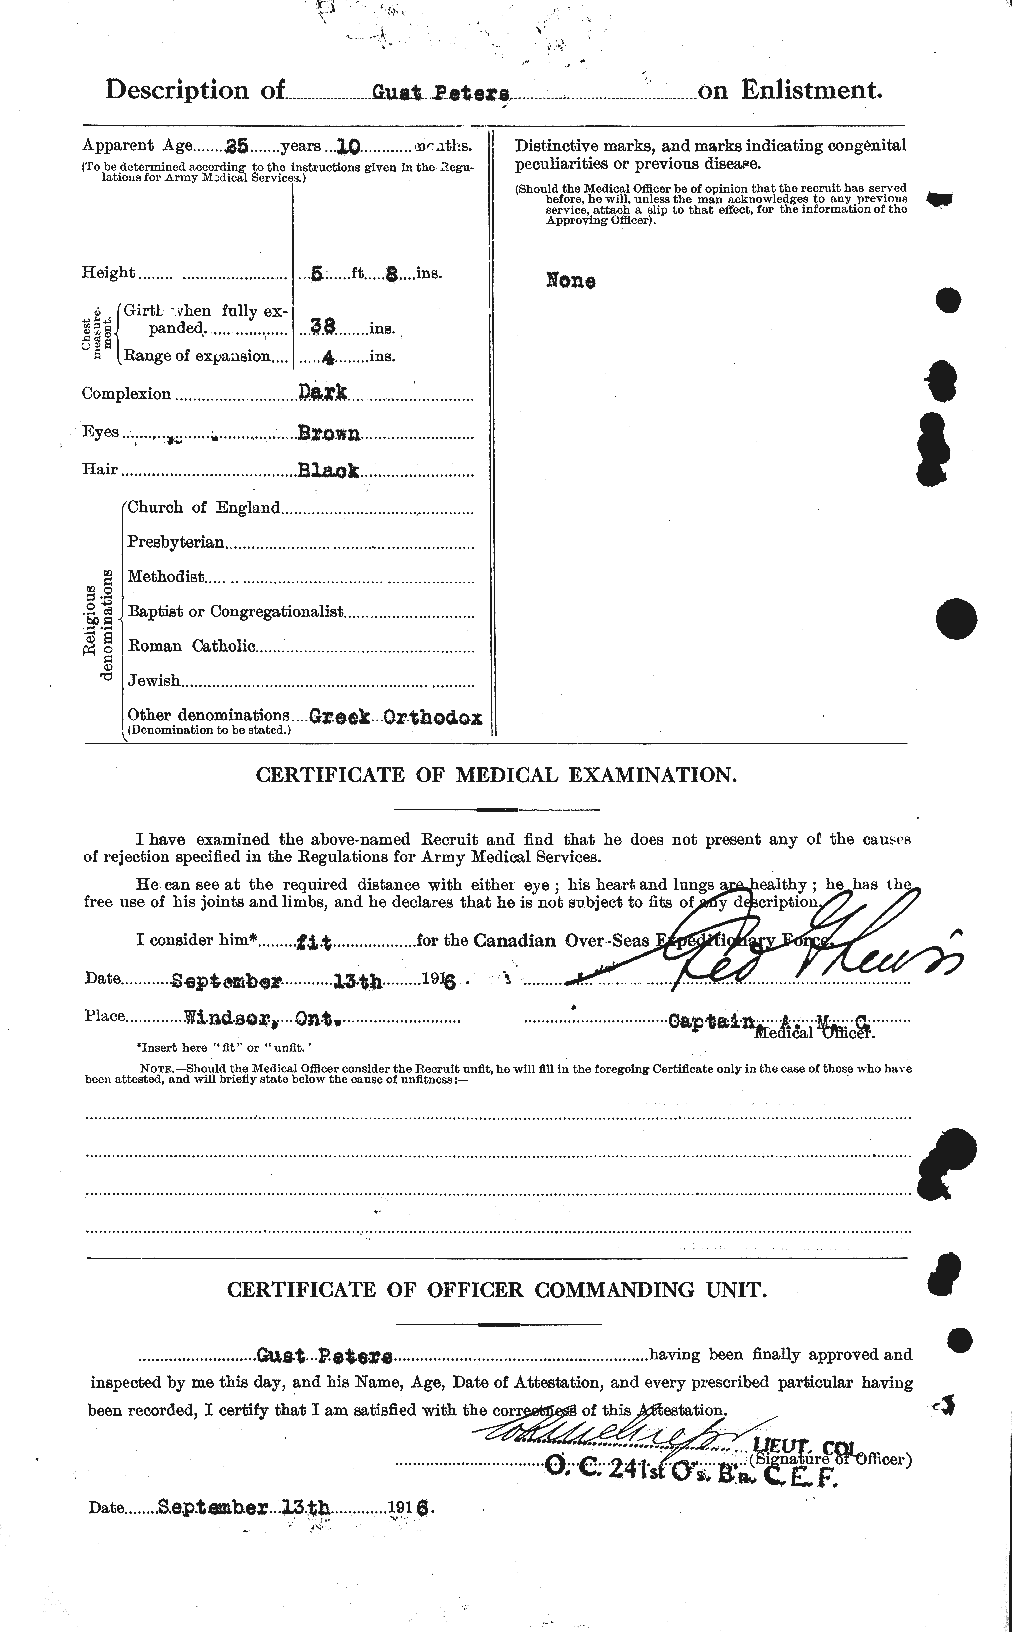 Personnel Records of the First World War - CEF 575473b